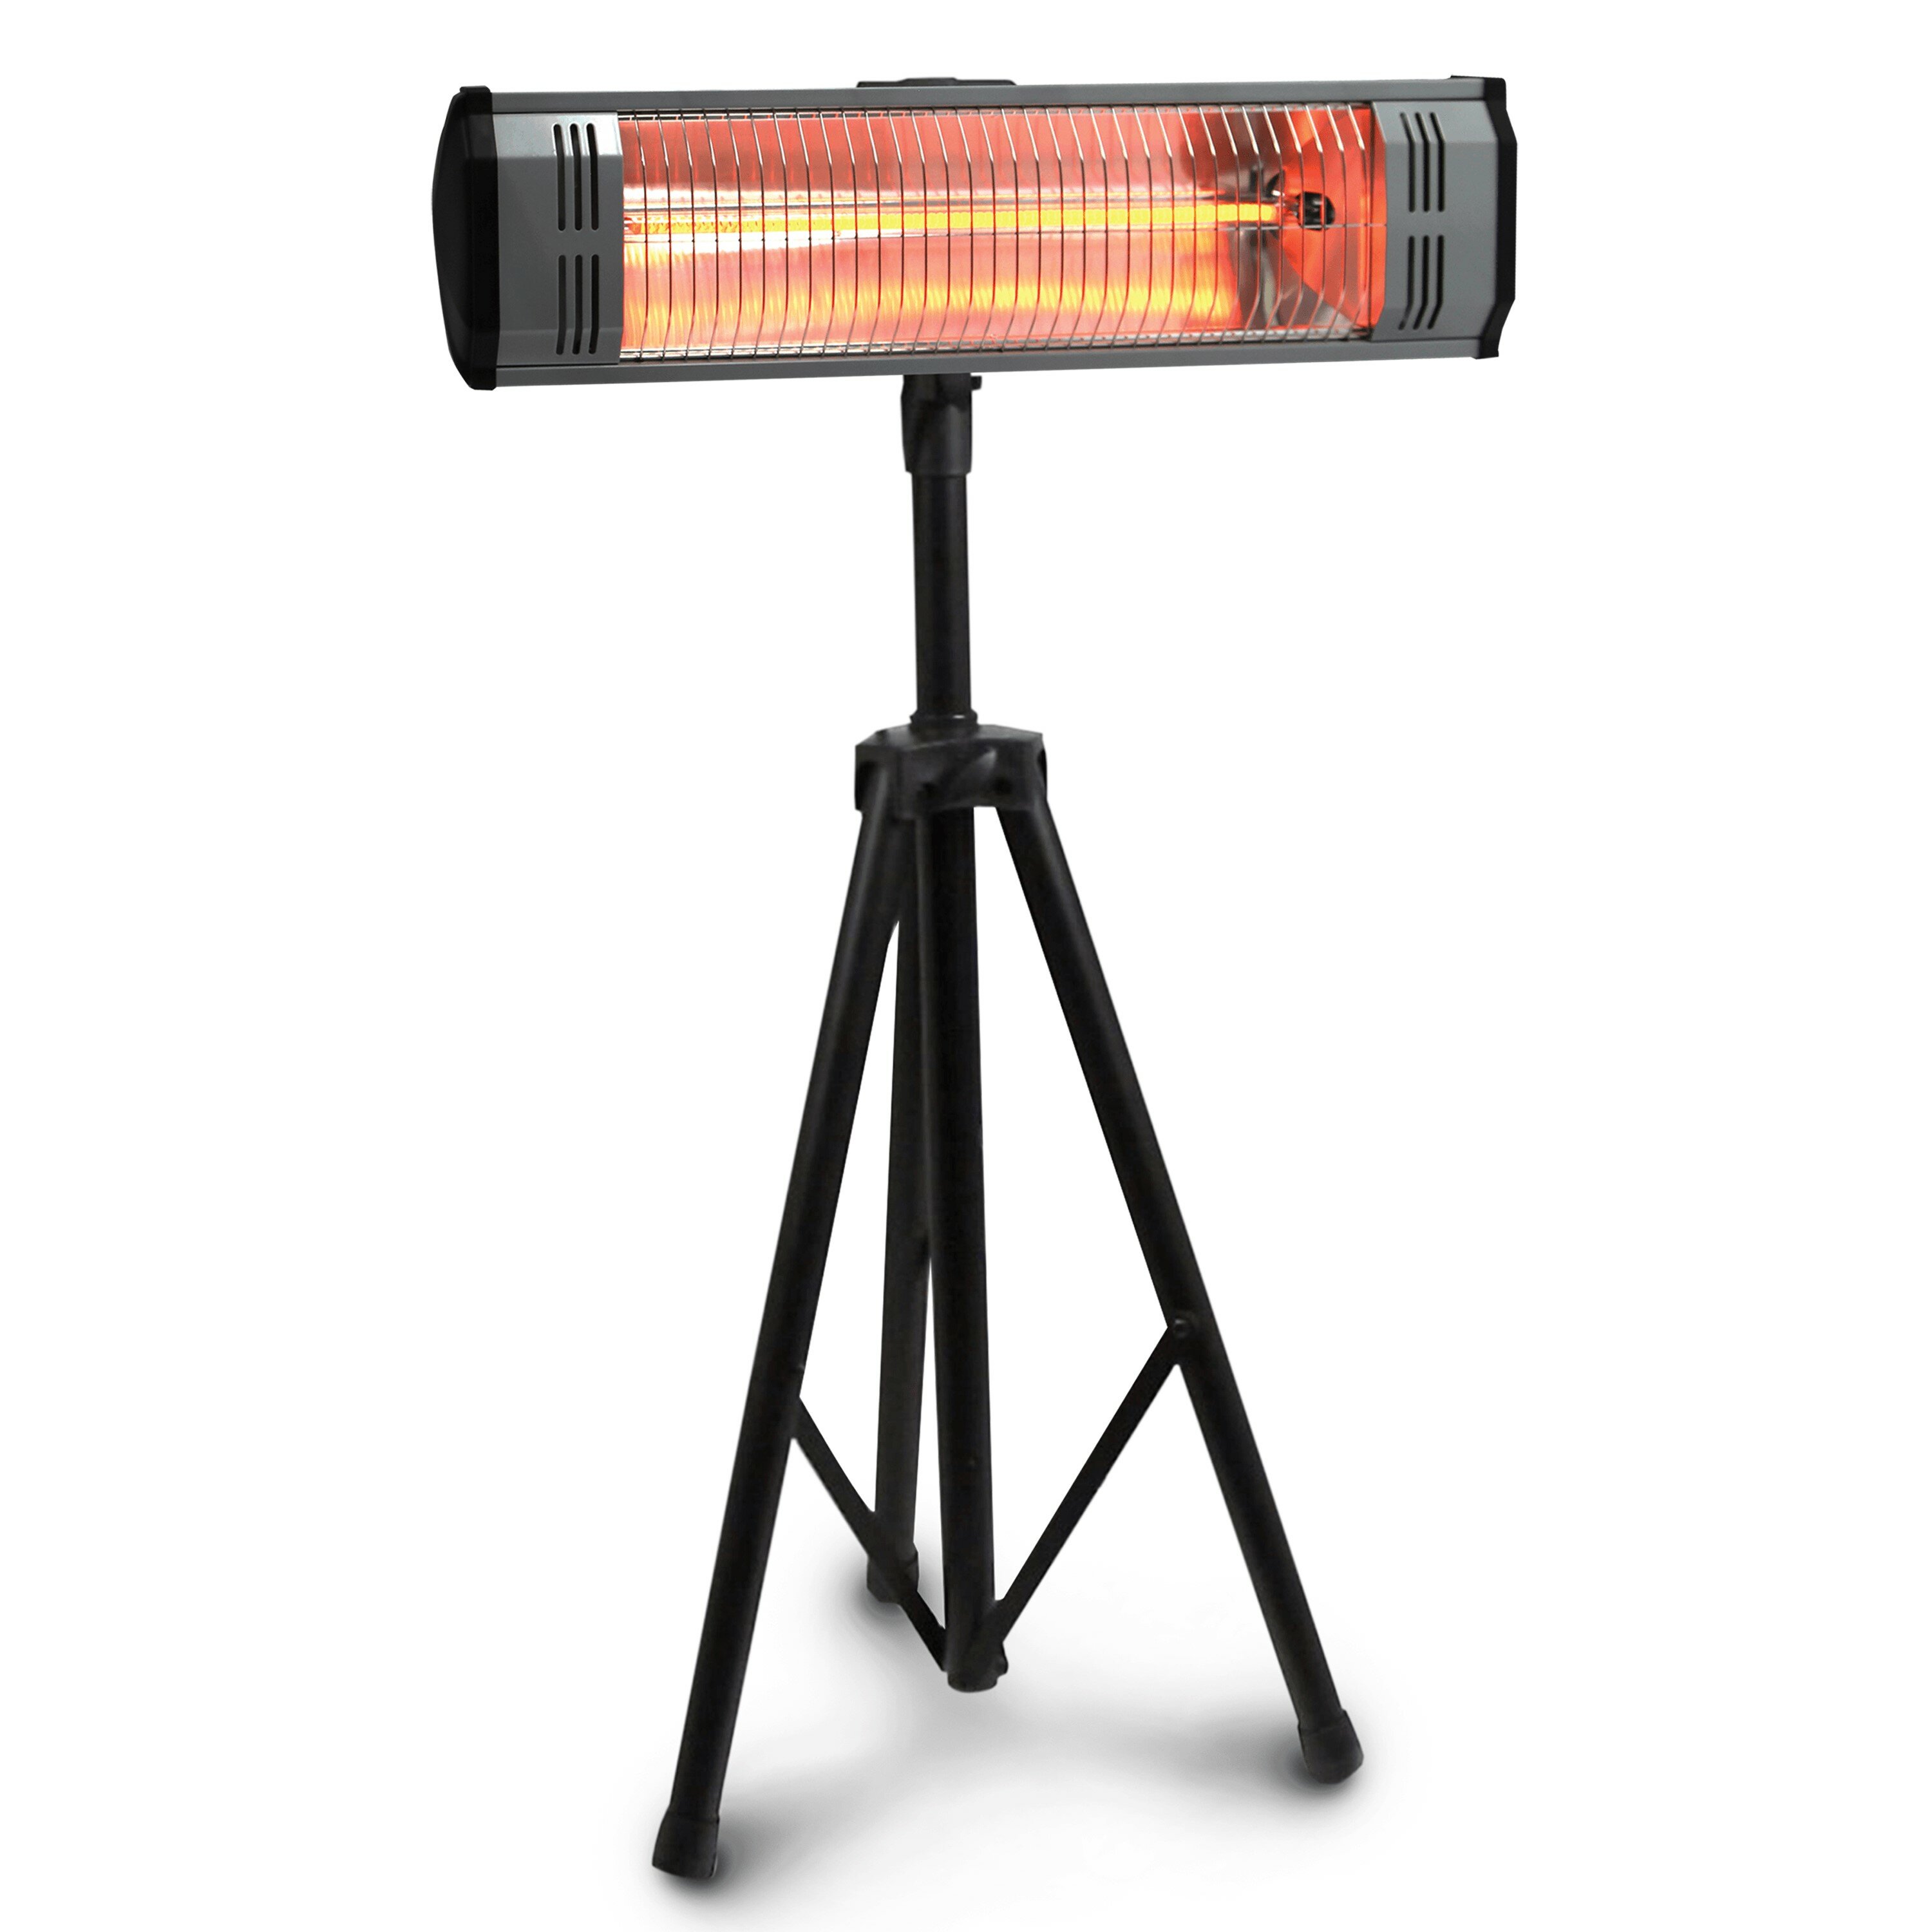 6 heating levels up to 20 m² Remote control and wall bracket Infrared heat Patio heater Black incl blumfeldt Gold Fever Smart App control Bluetooth Infrared radiant heater 2000 W